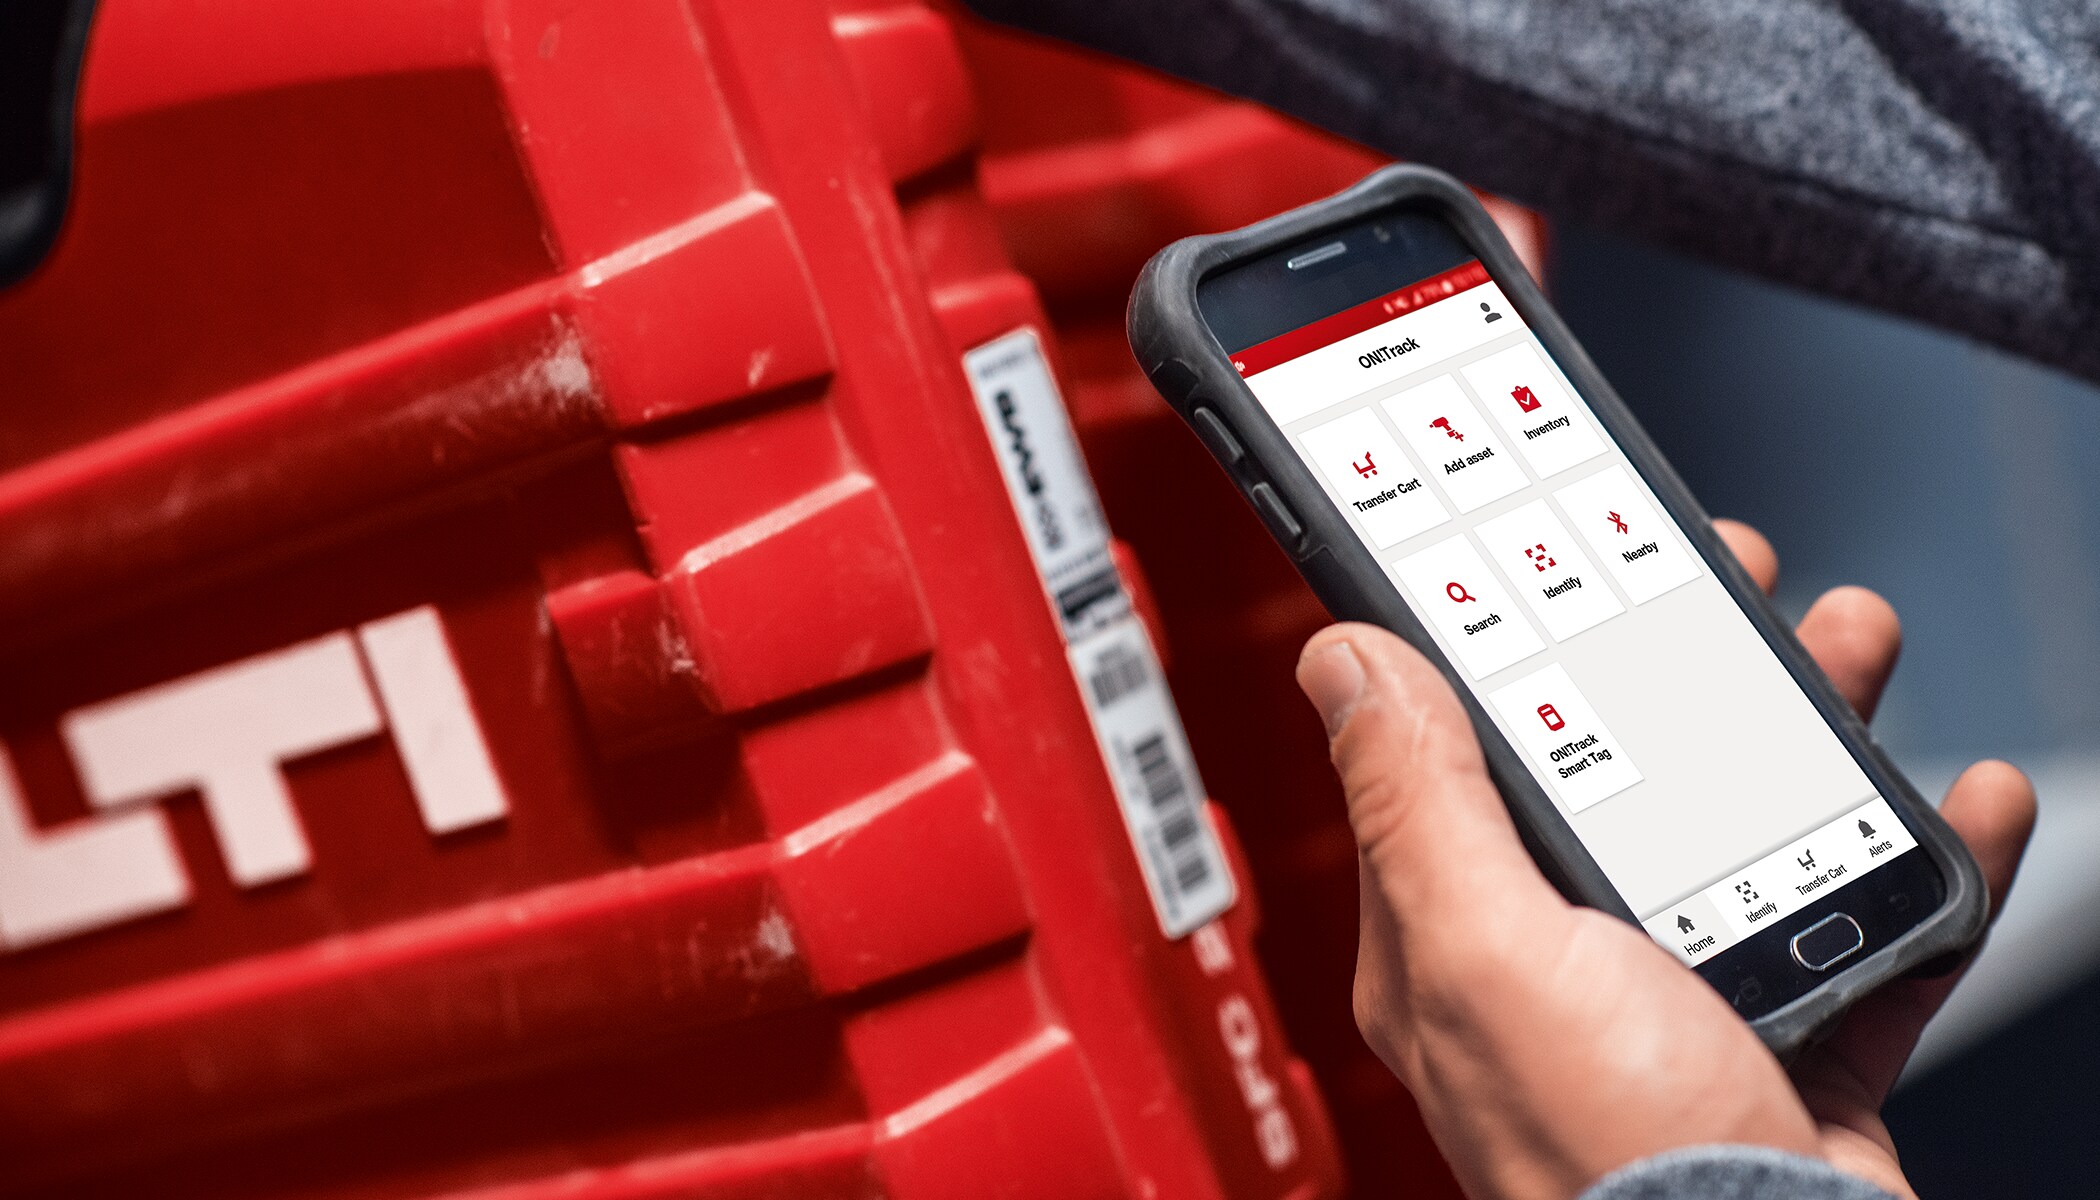 a man uses ON!Track on a mobile device to scan a hilti tool box